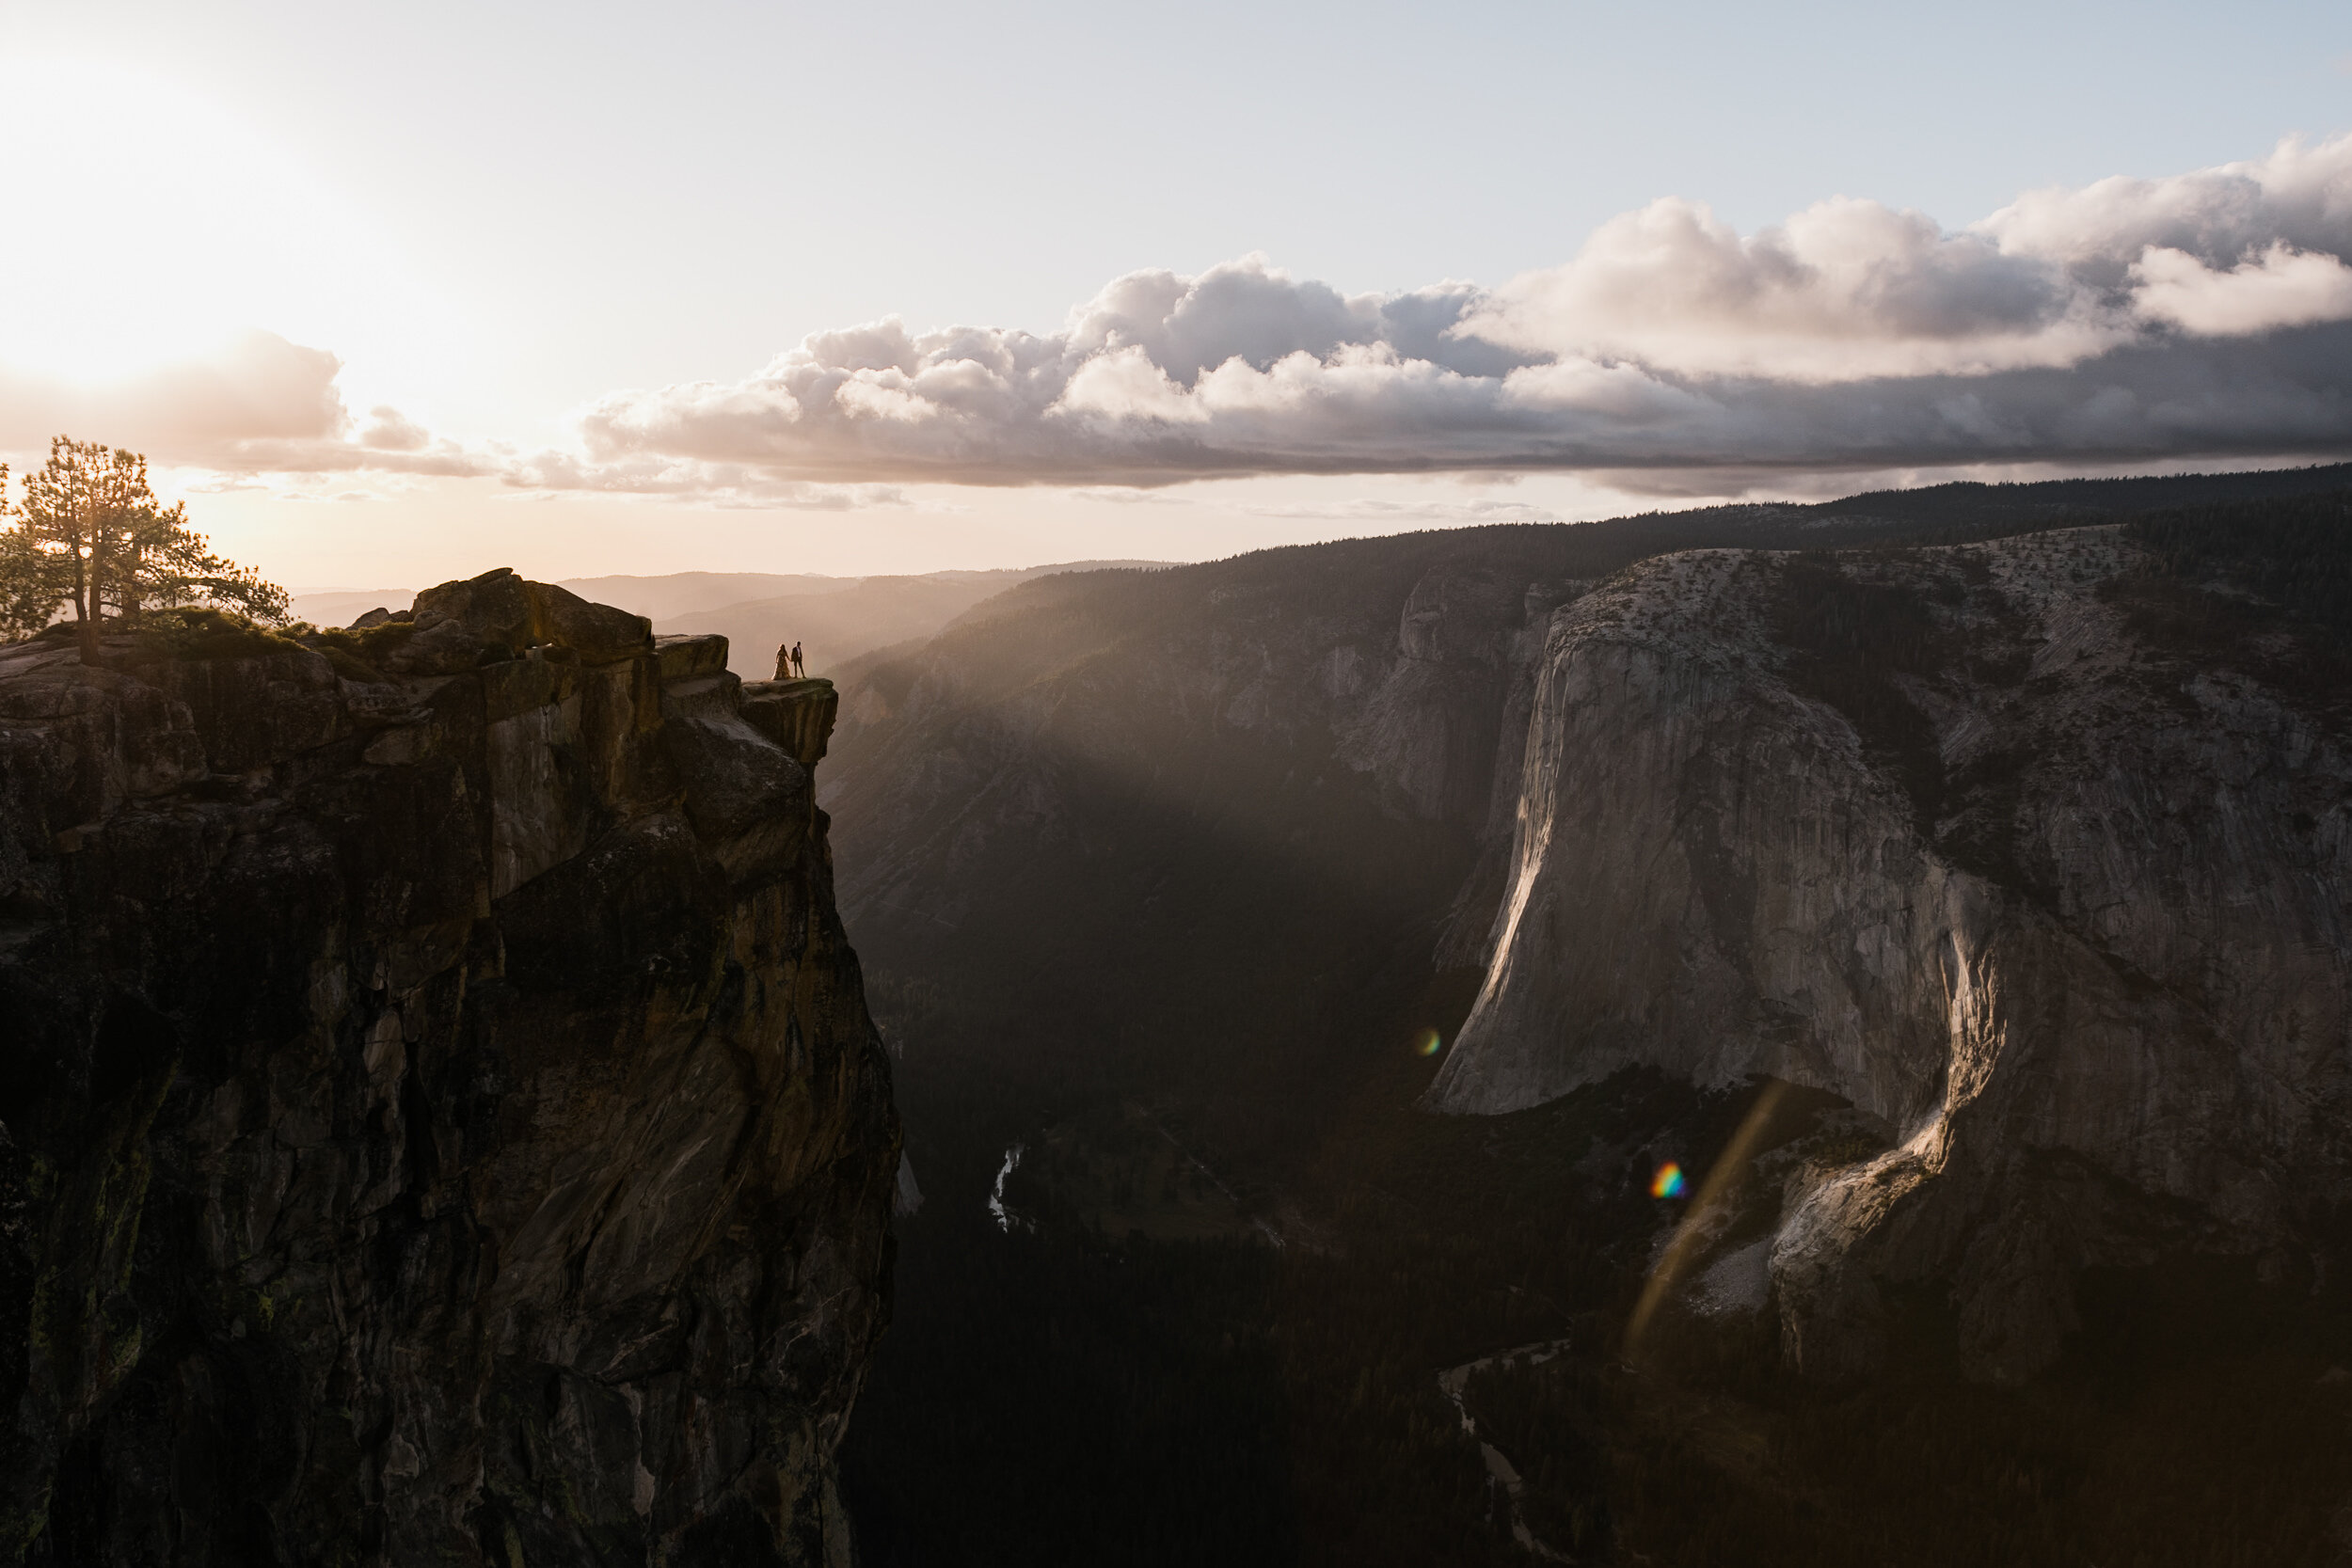 Glamorous Hiking Engagement Session at Taft Point in Yosemite National Park | The Hearnes Adventure Photography | Top Yosemite Photographers